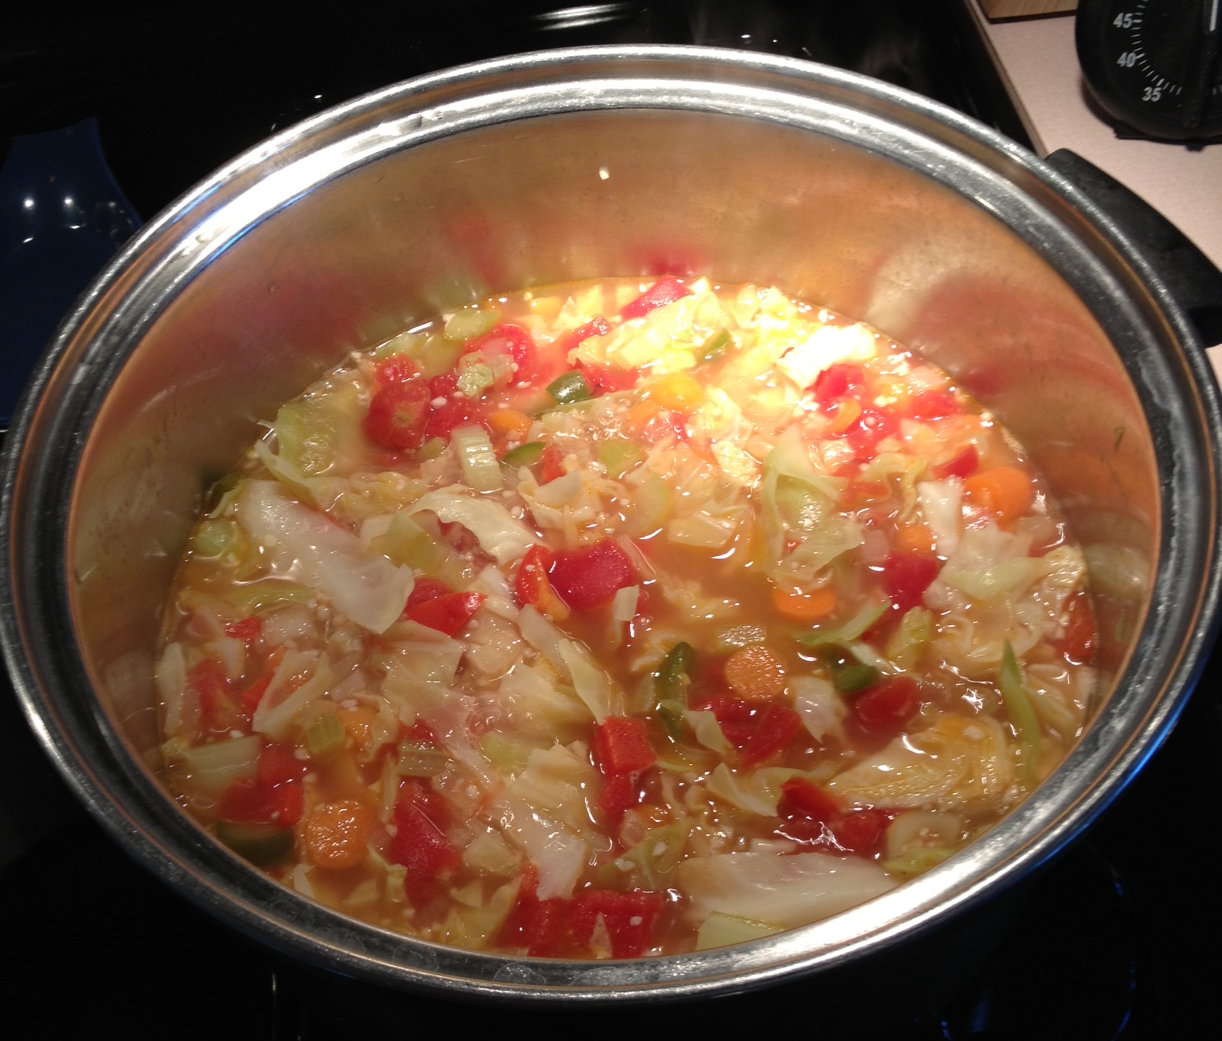 7 day cabbage soup diet recipe 3 day